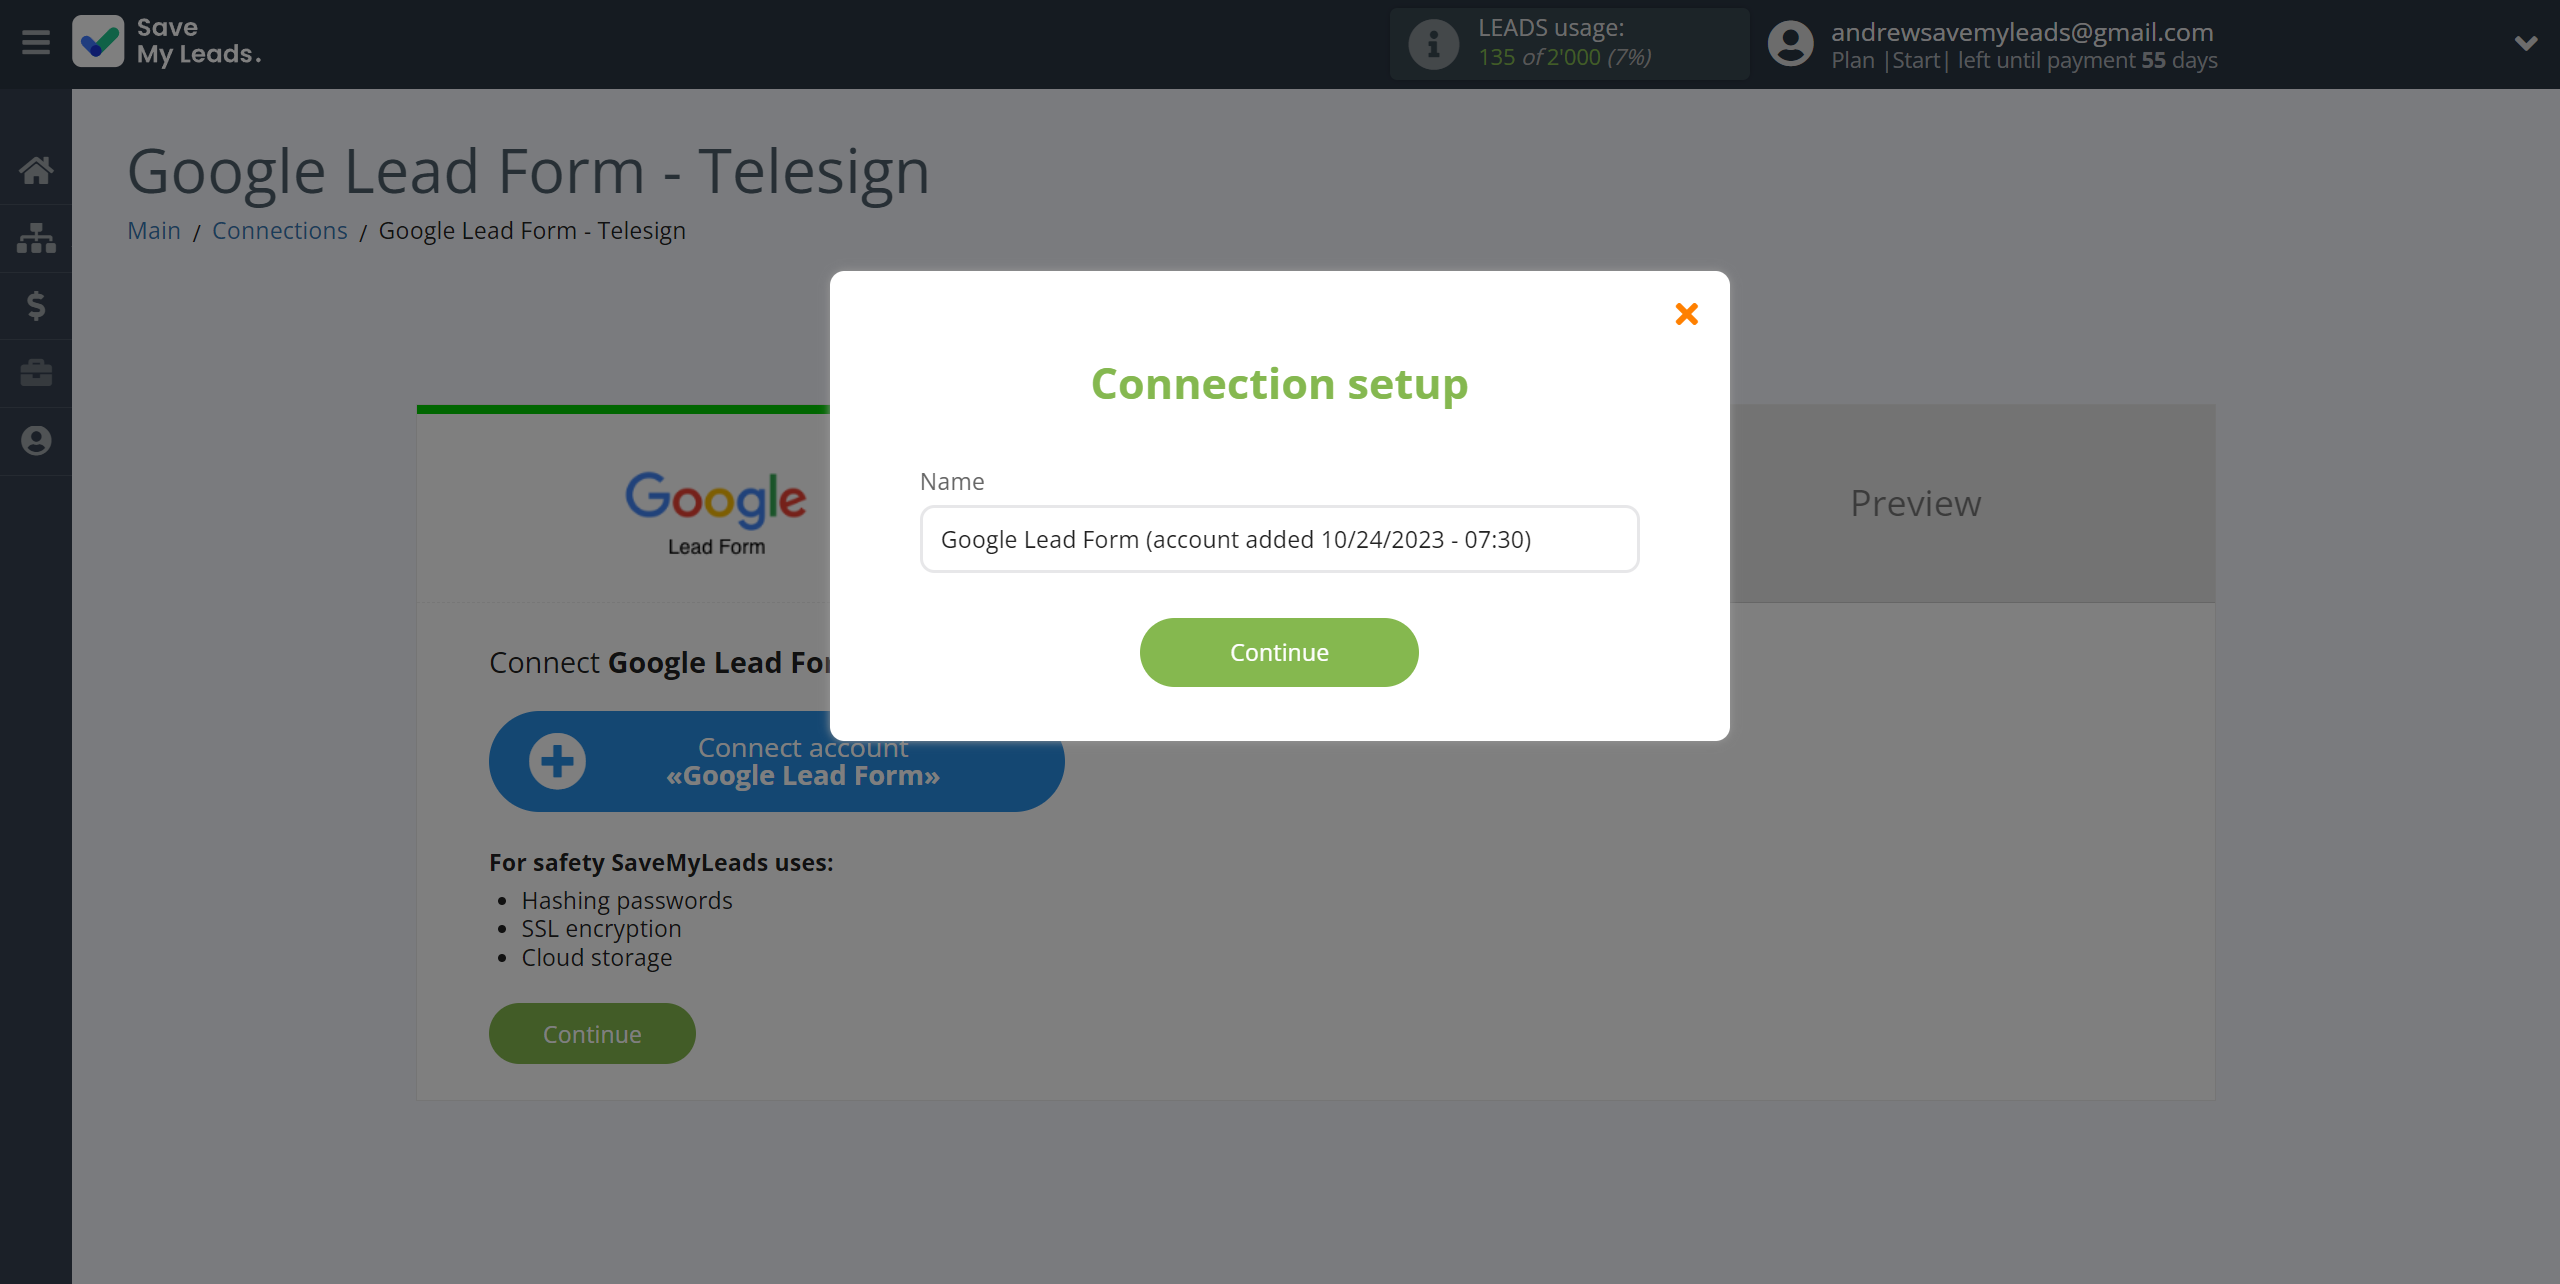 How to Connect Google Lead Form with Telesign | Data Source account connection